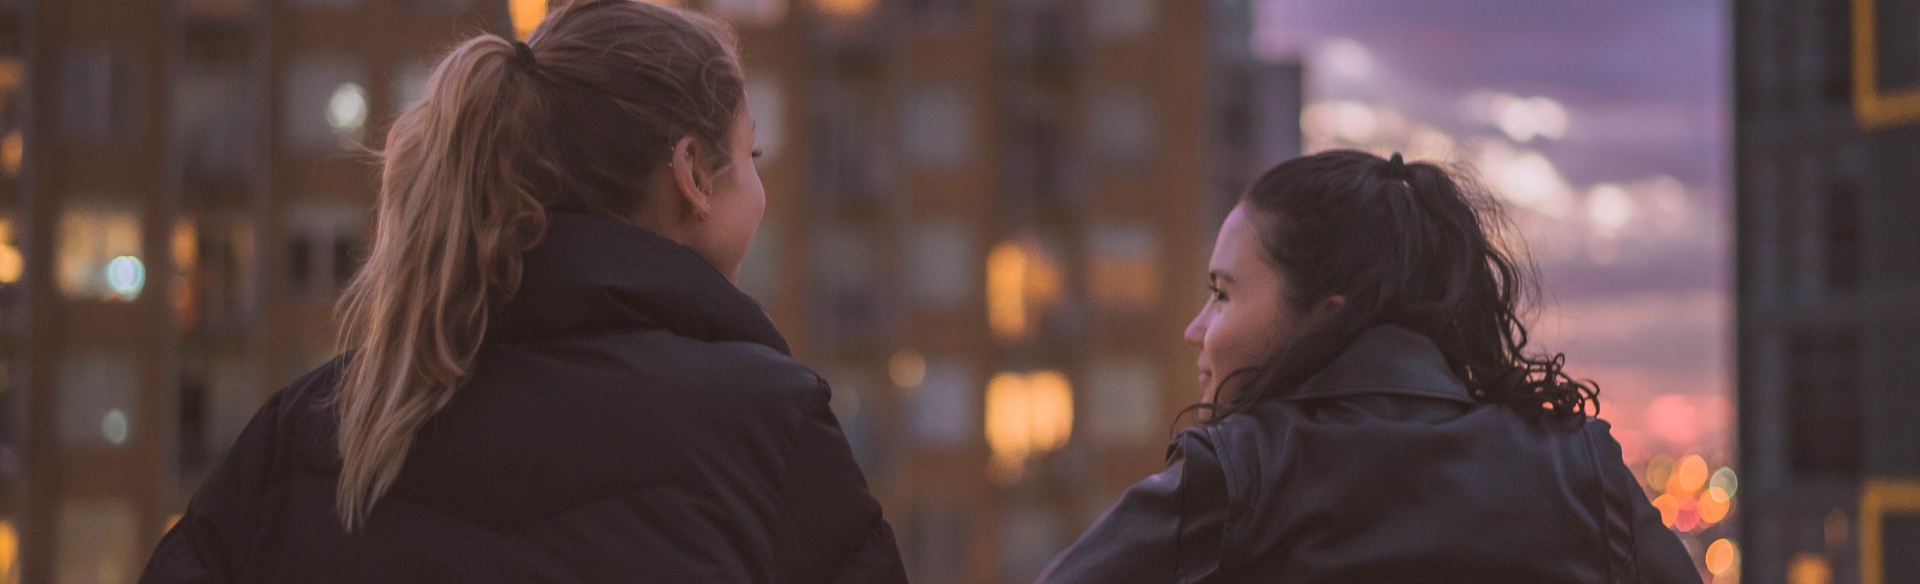 Two women talk to each other on a rooftop in a downtown setting